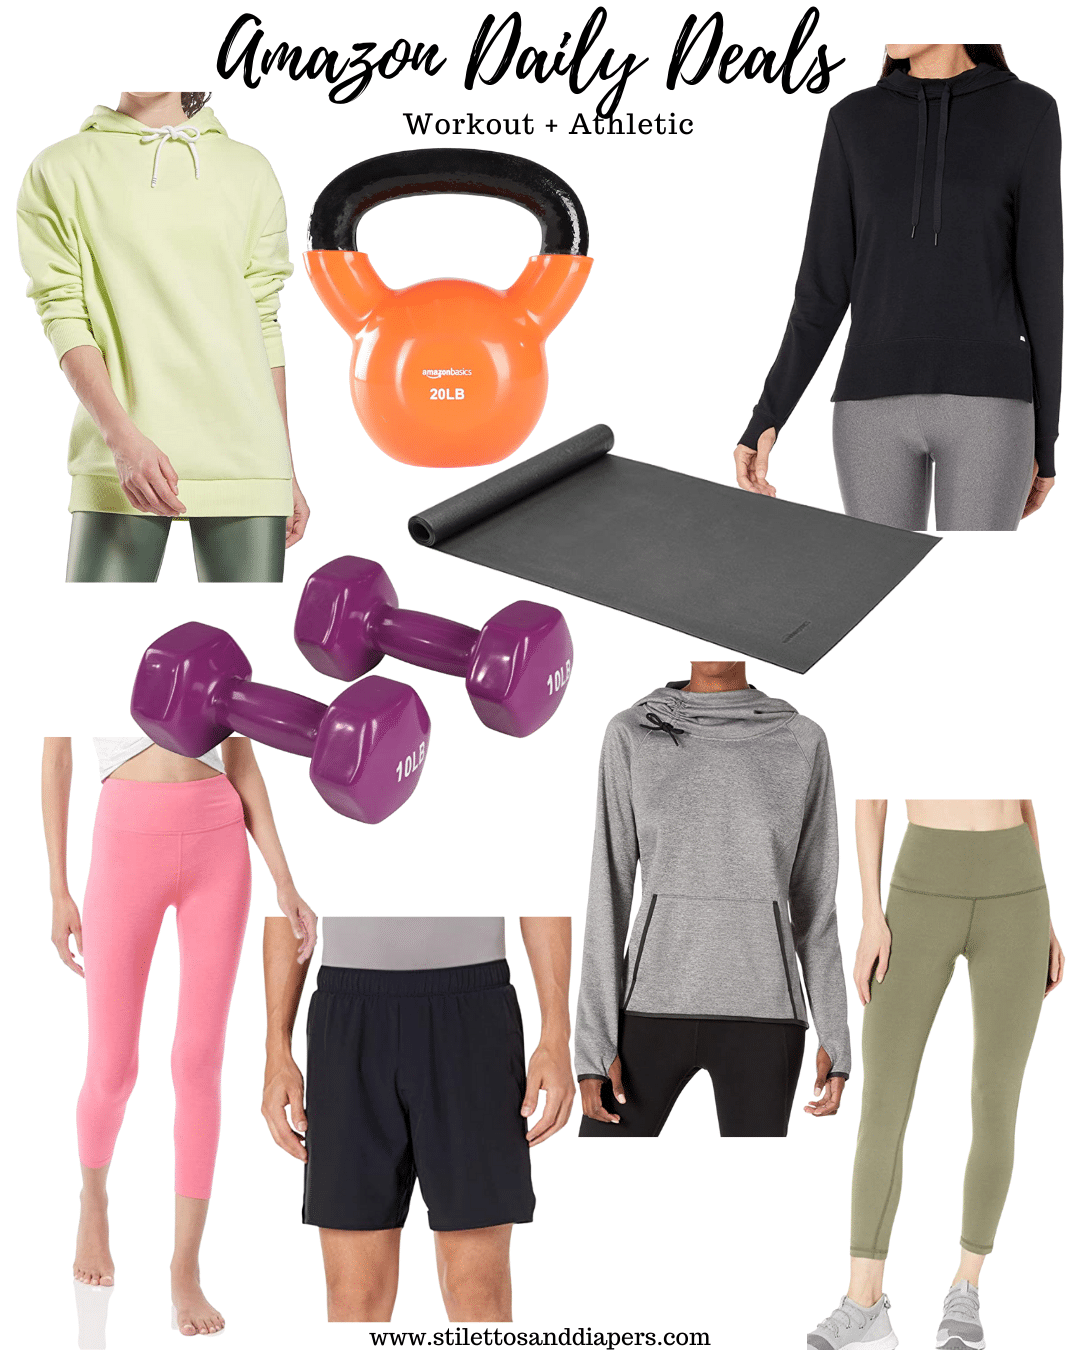 Amazon Epic Daily Deals Workout and Athletic Deals, Stilettos and Diapers